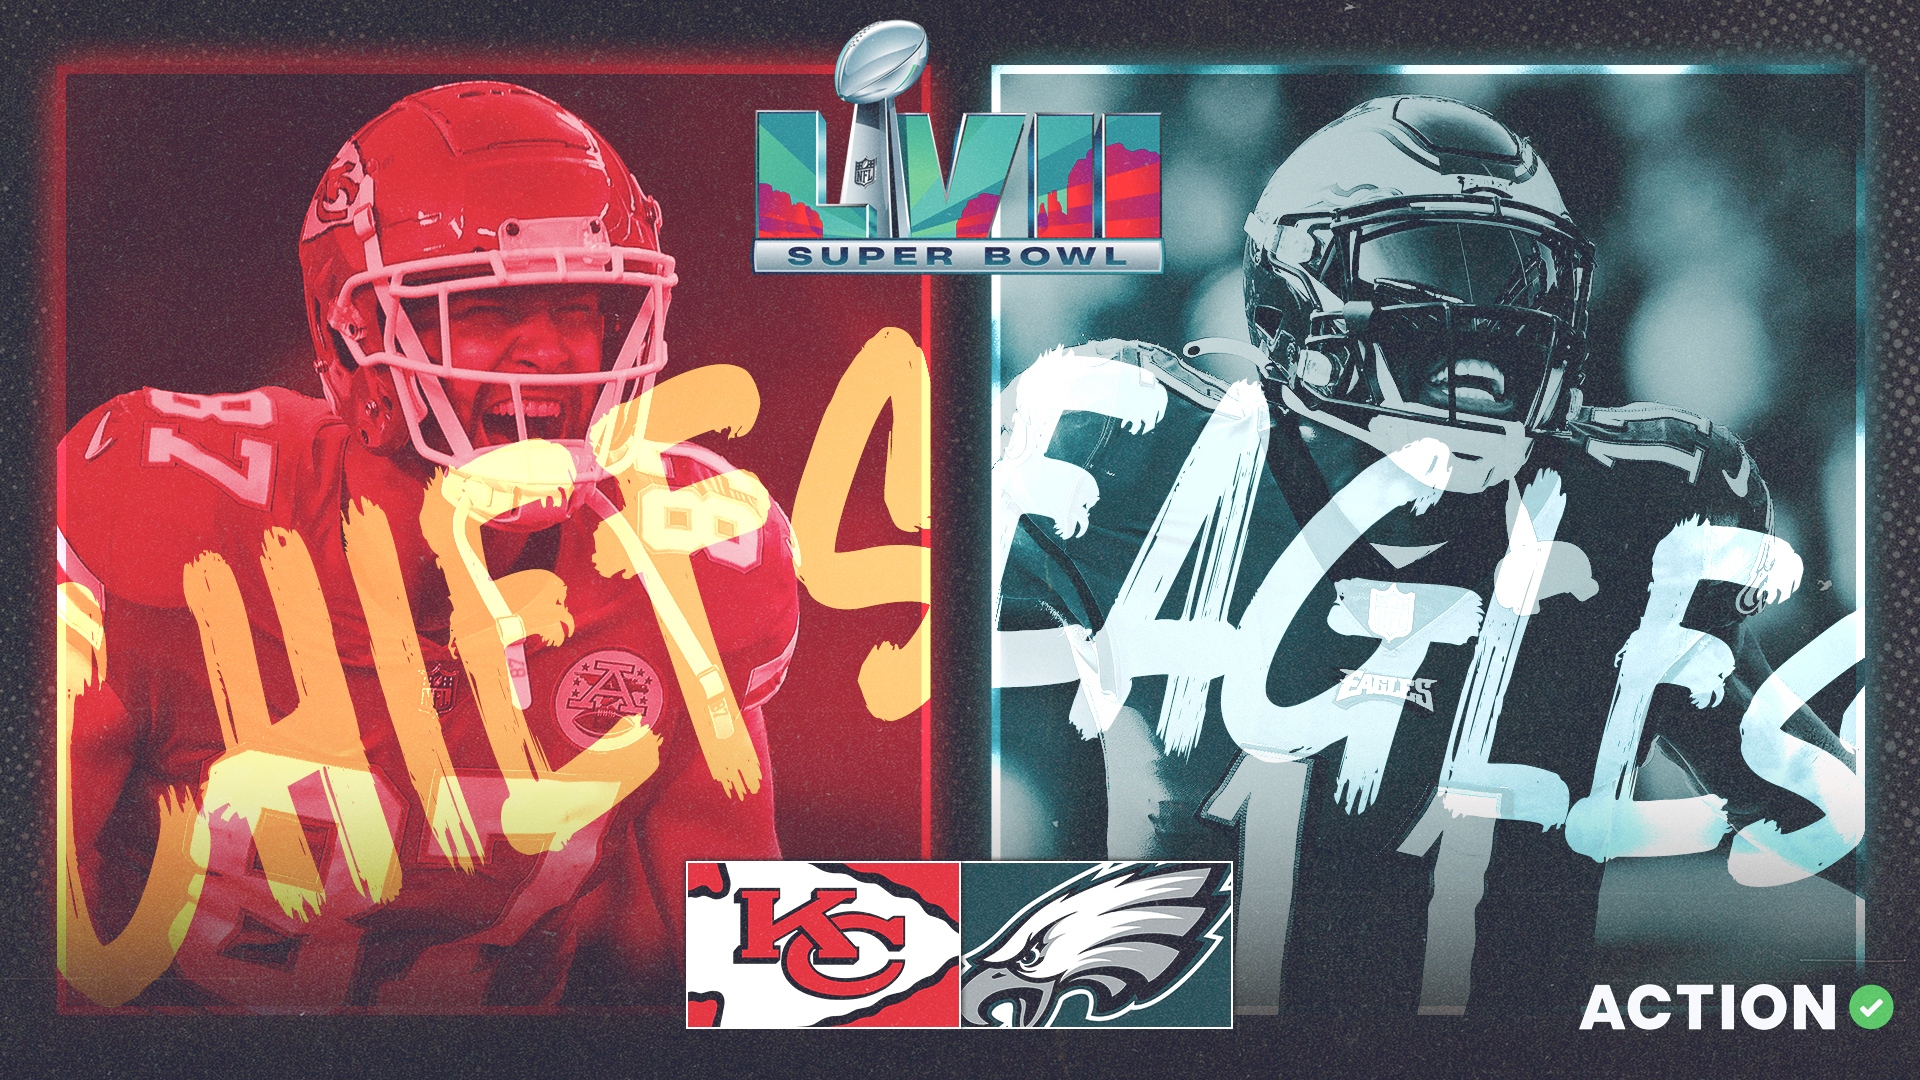 Chiefs vs Eagles Super Bowl Picks, Odds: The Bets We've Already Made